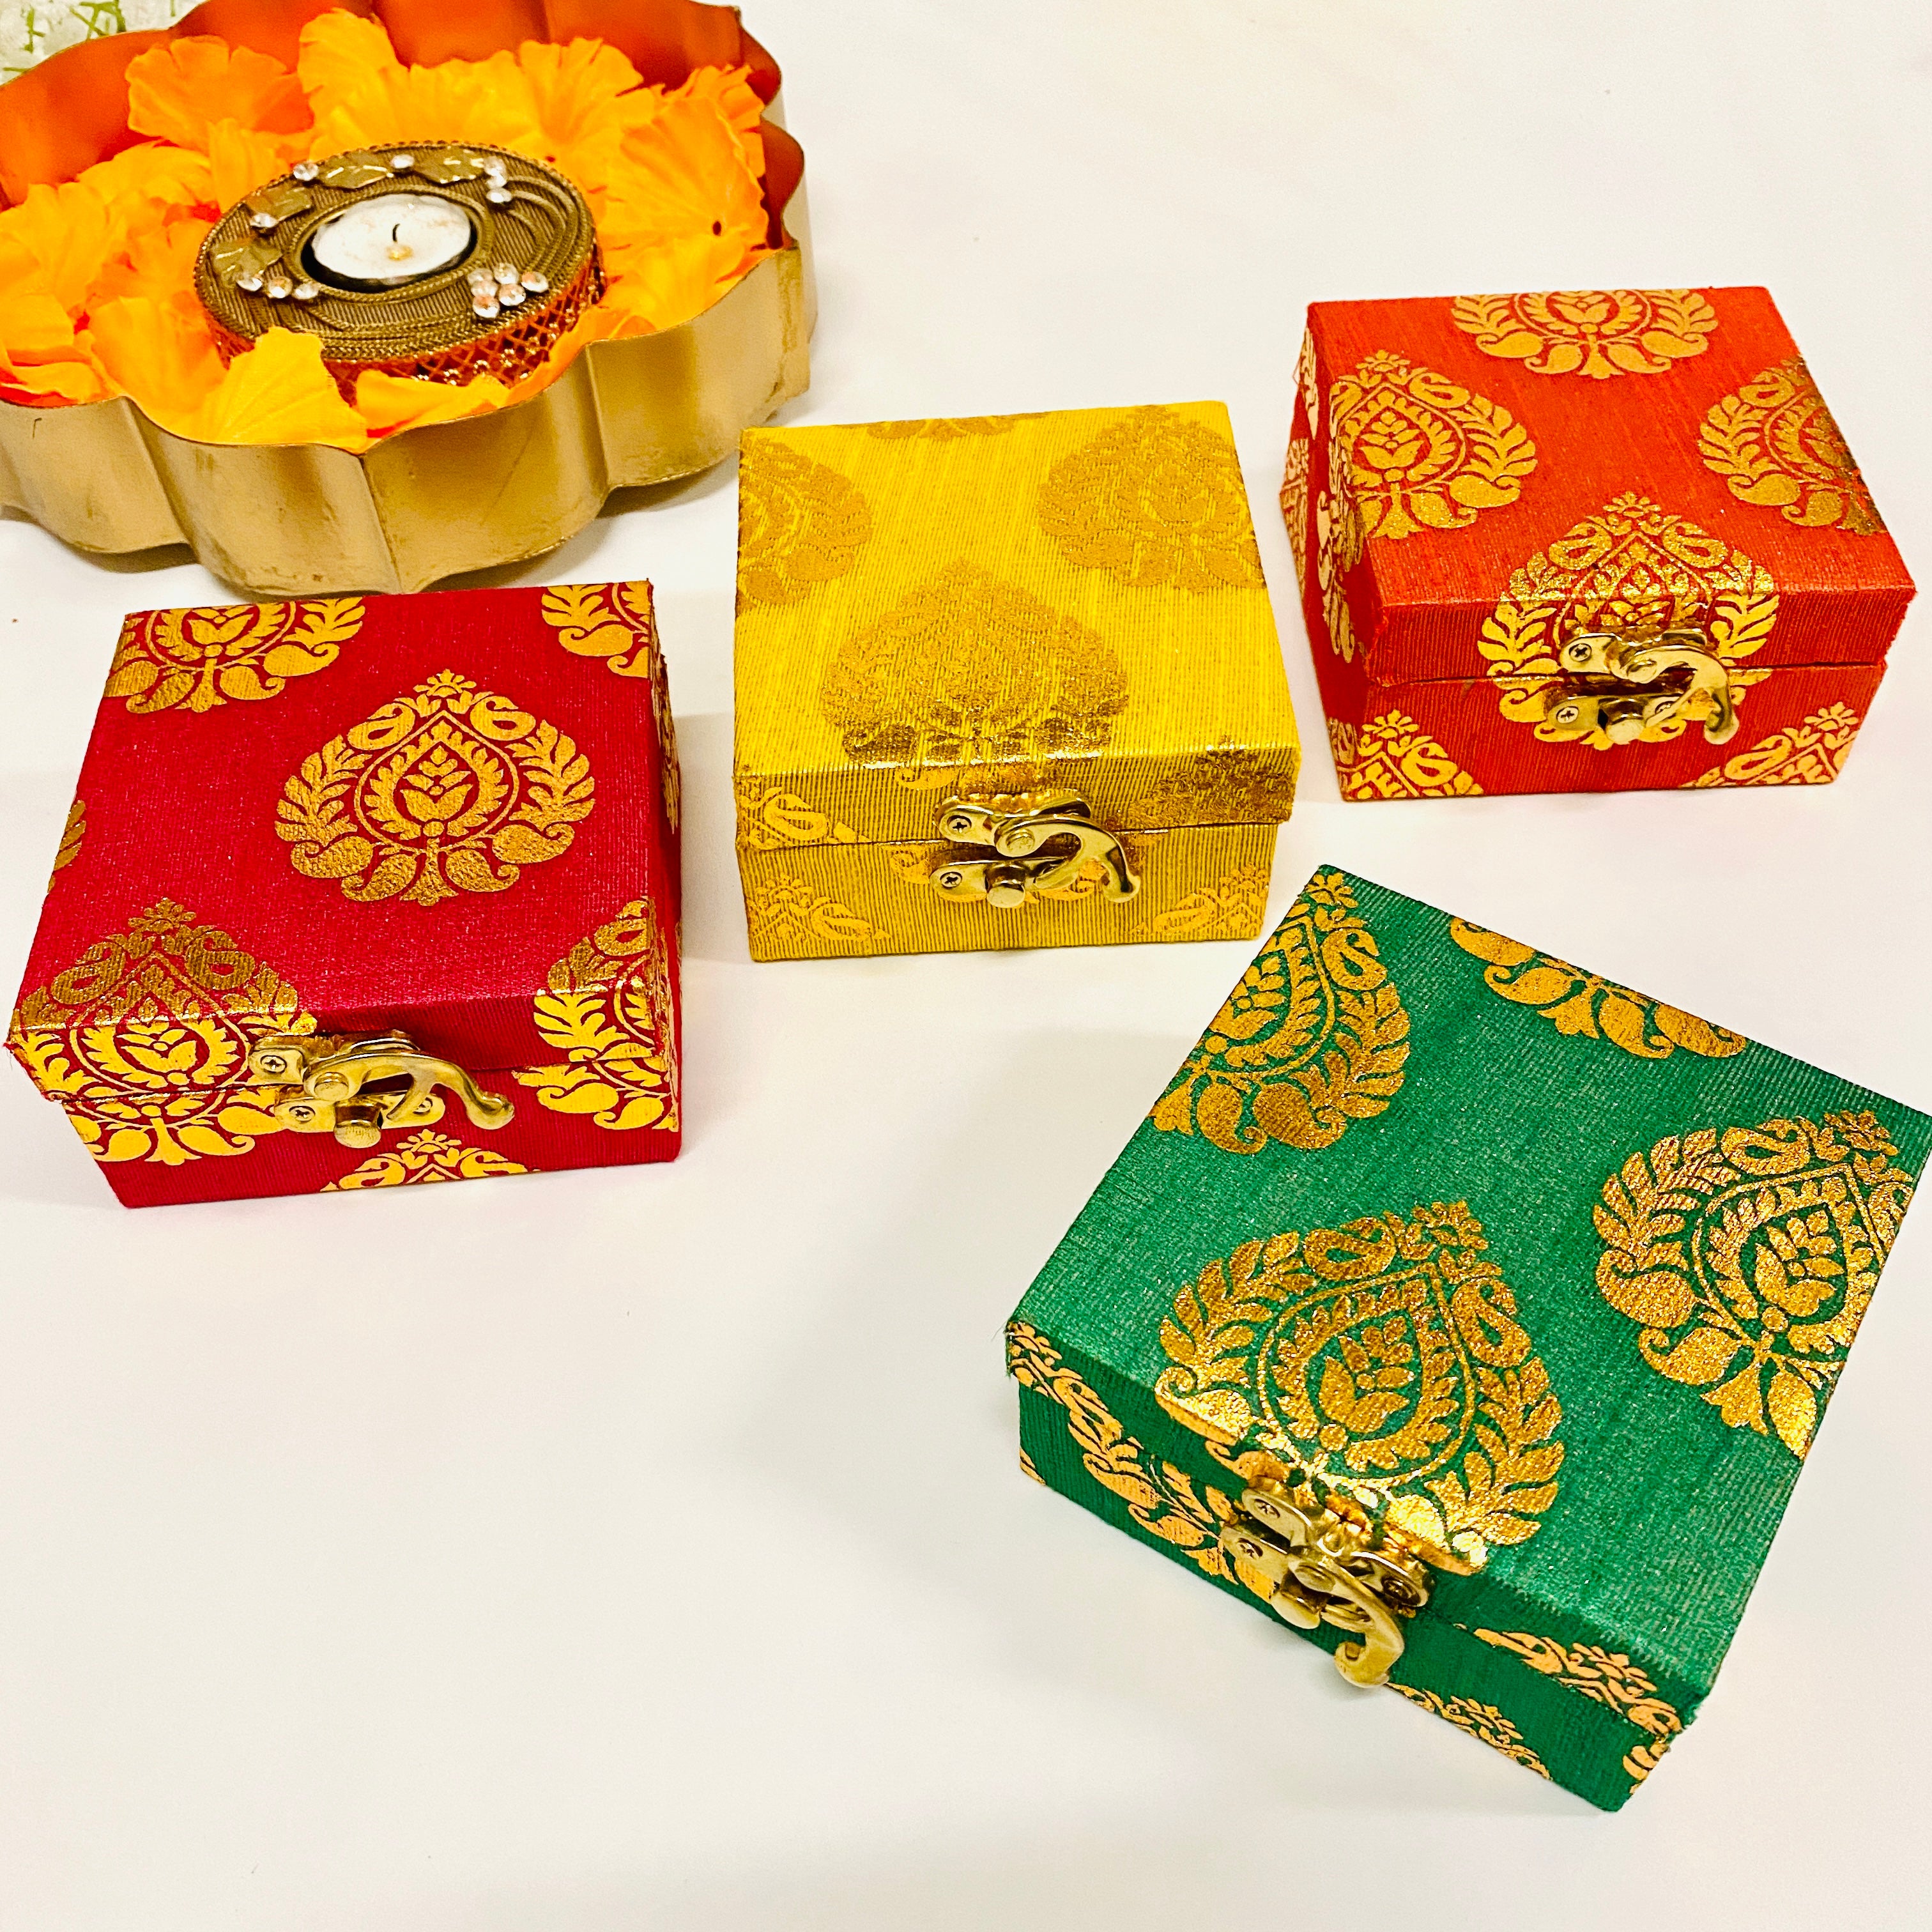 BEAUNIQUE Chinese Wedding Traditional Wedding Favors Candy Box Gift Box  Doorgift | Shopee Malaysia